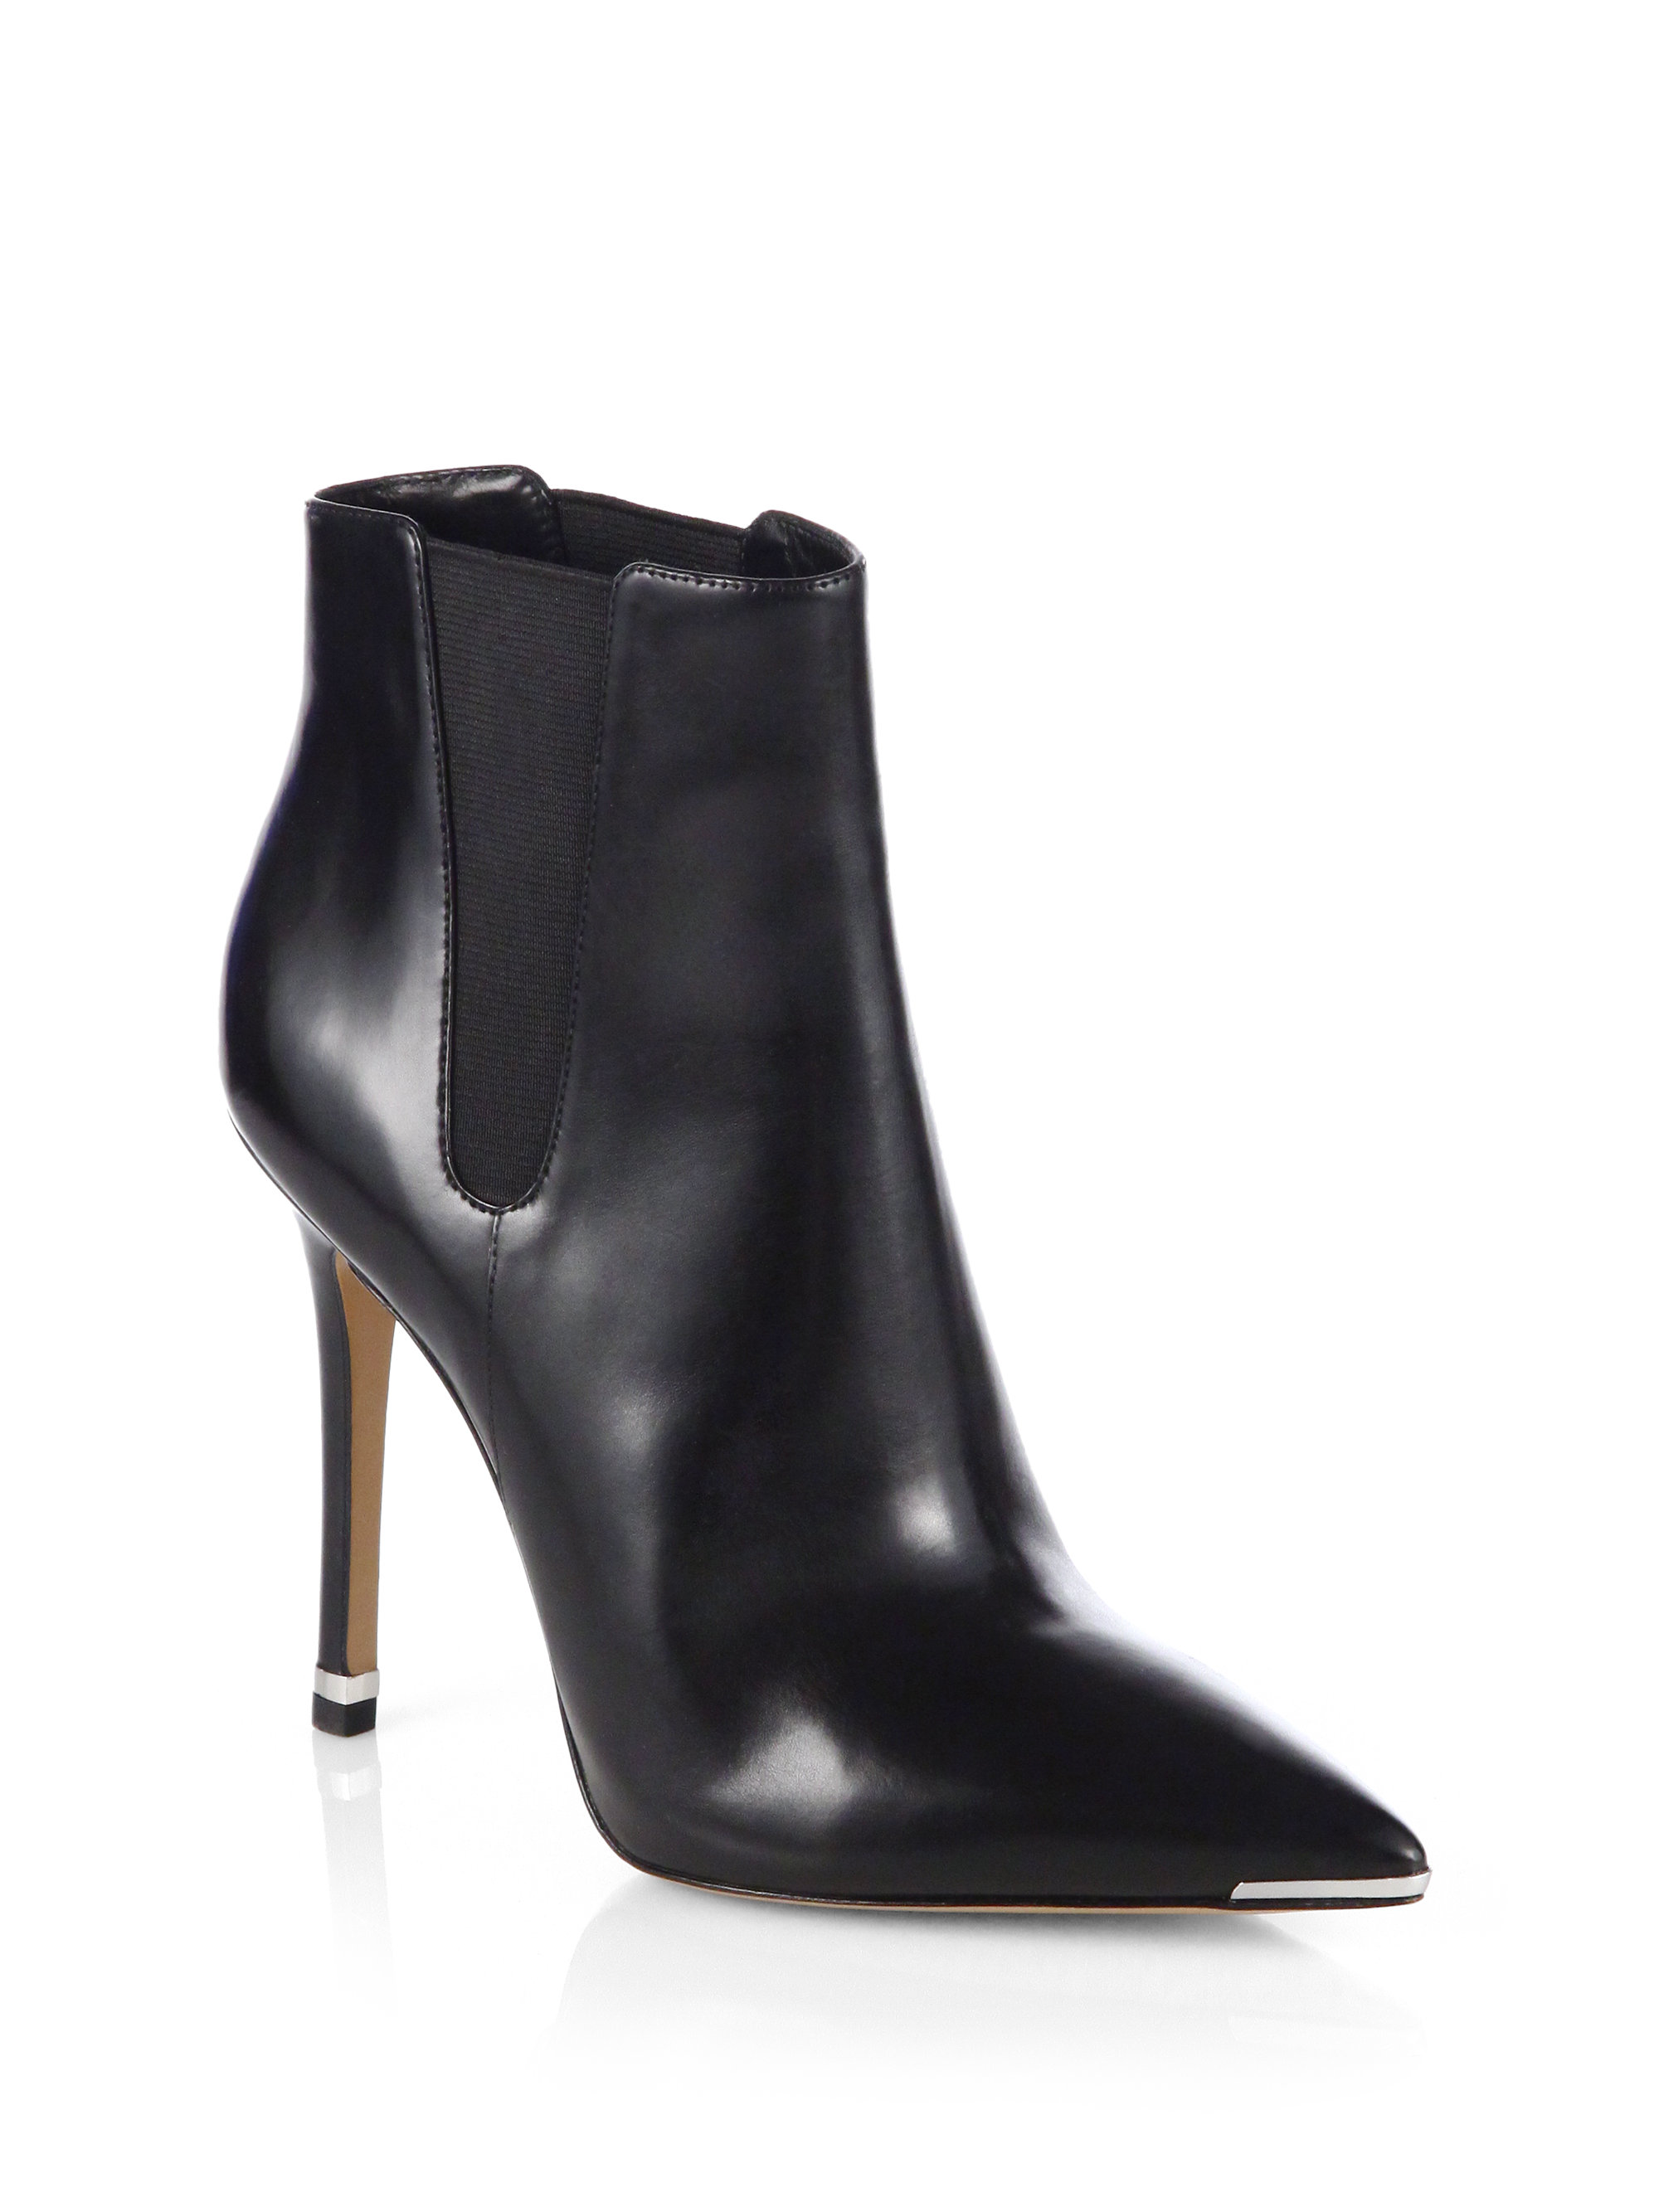 Michael Kors Andie Leather Ankle Boots in Black | Lyst